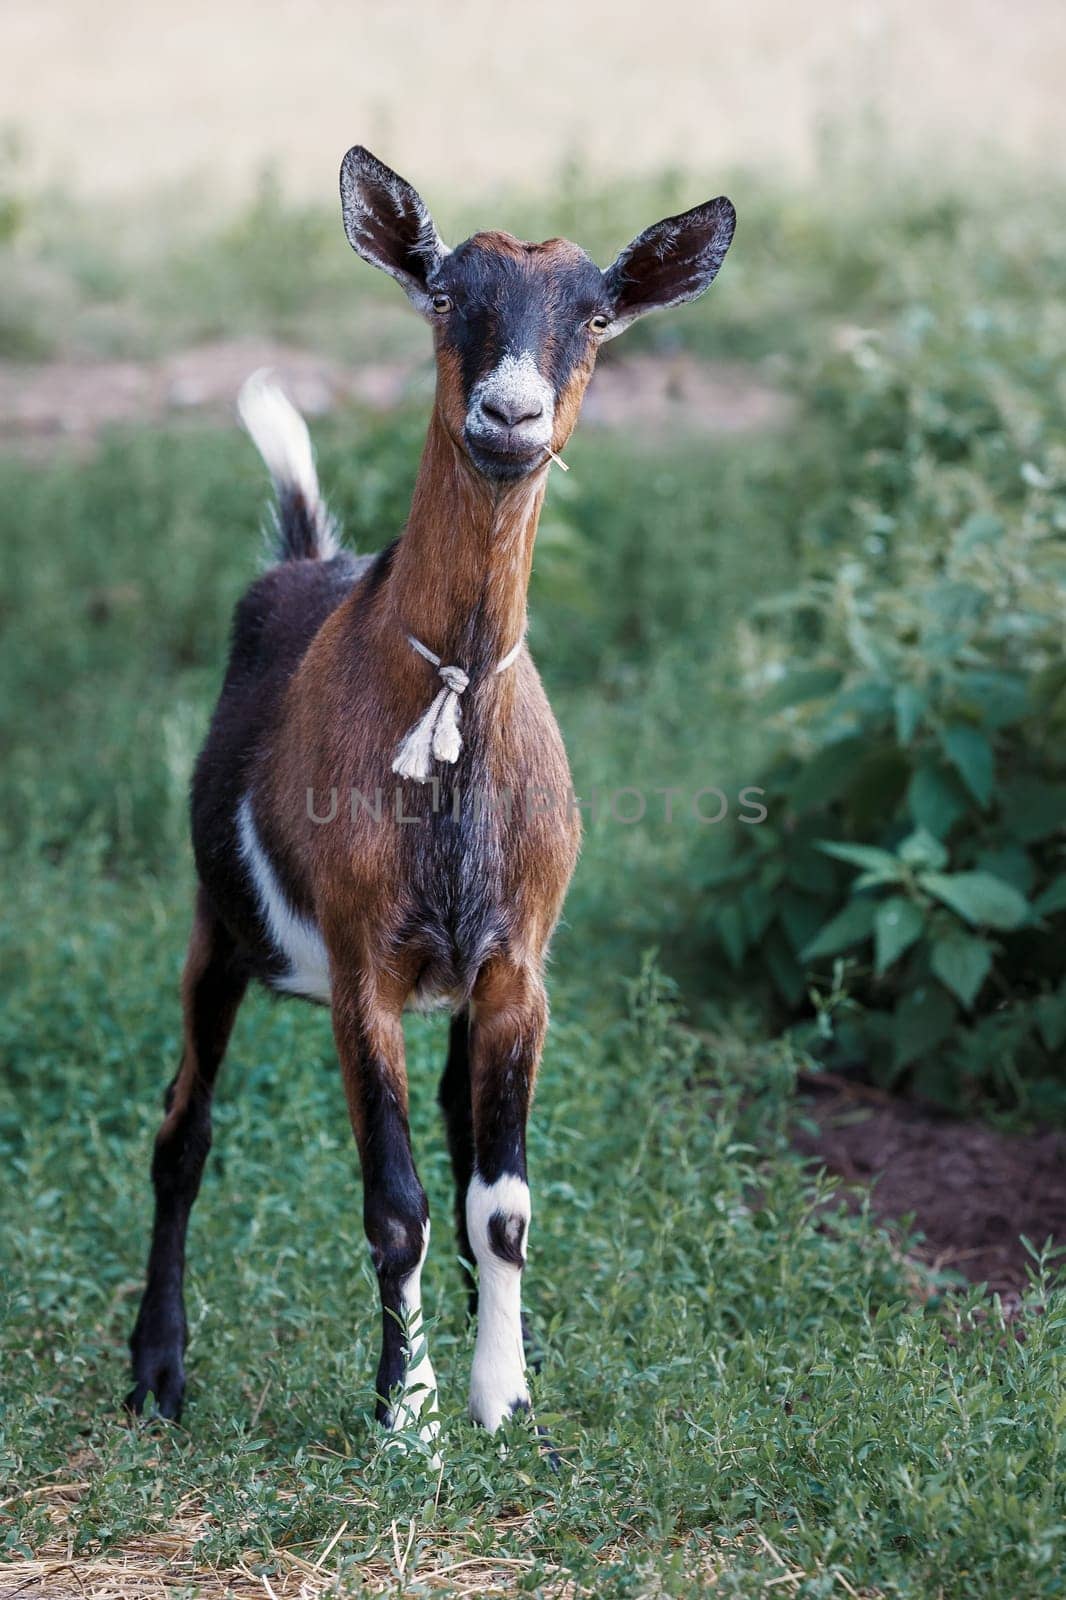 A young, small, brown goat with straight ears she listens intently and is very careful. by Lincikas